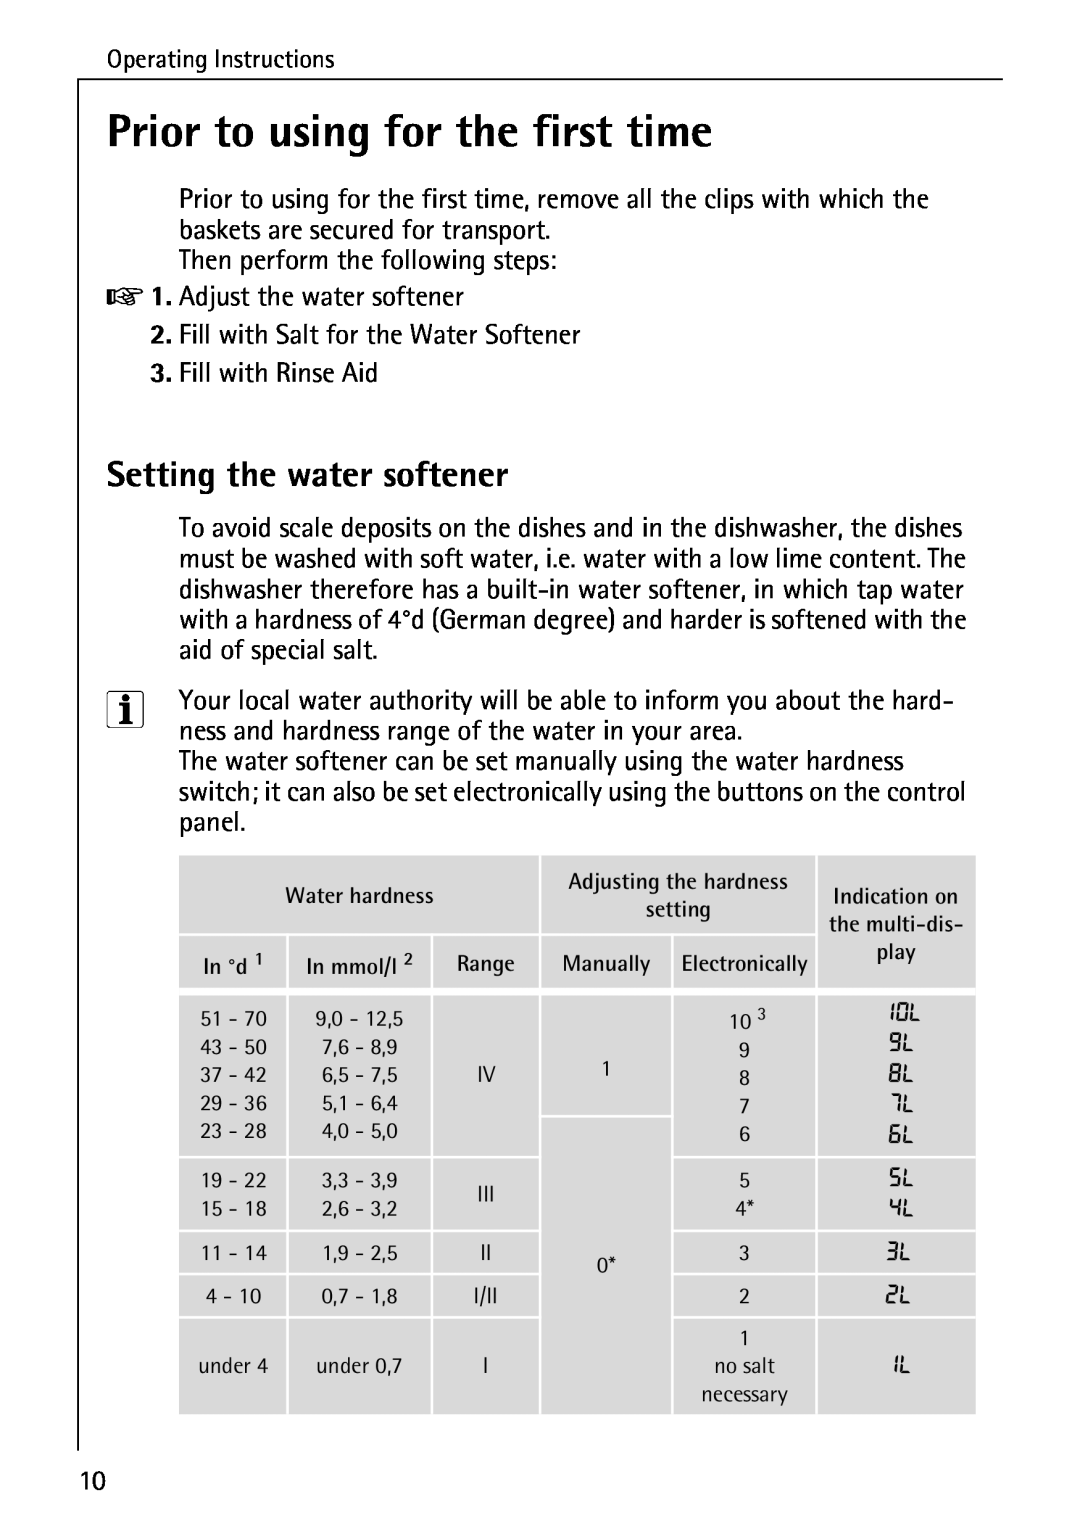 AEG 50760 I manual Prior to using for the first time, Setting the water softener 